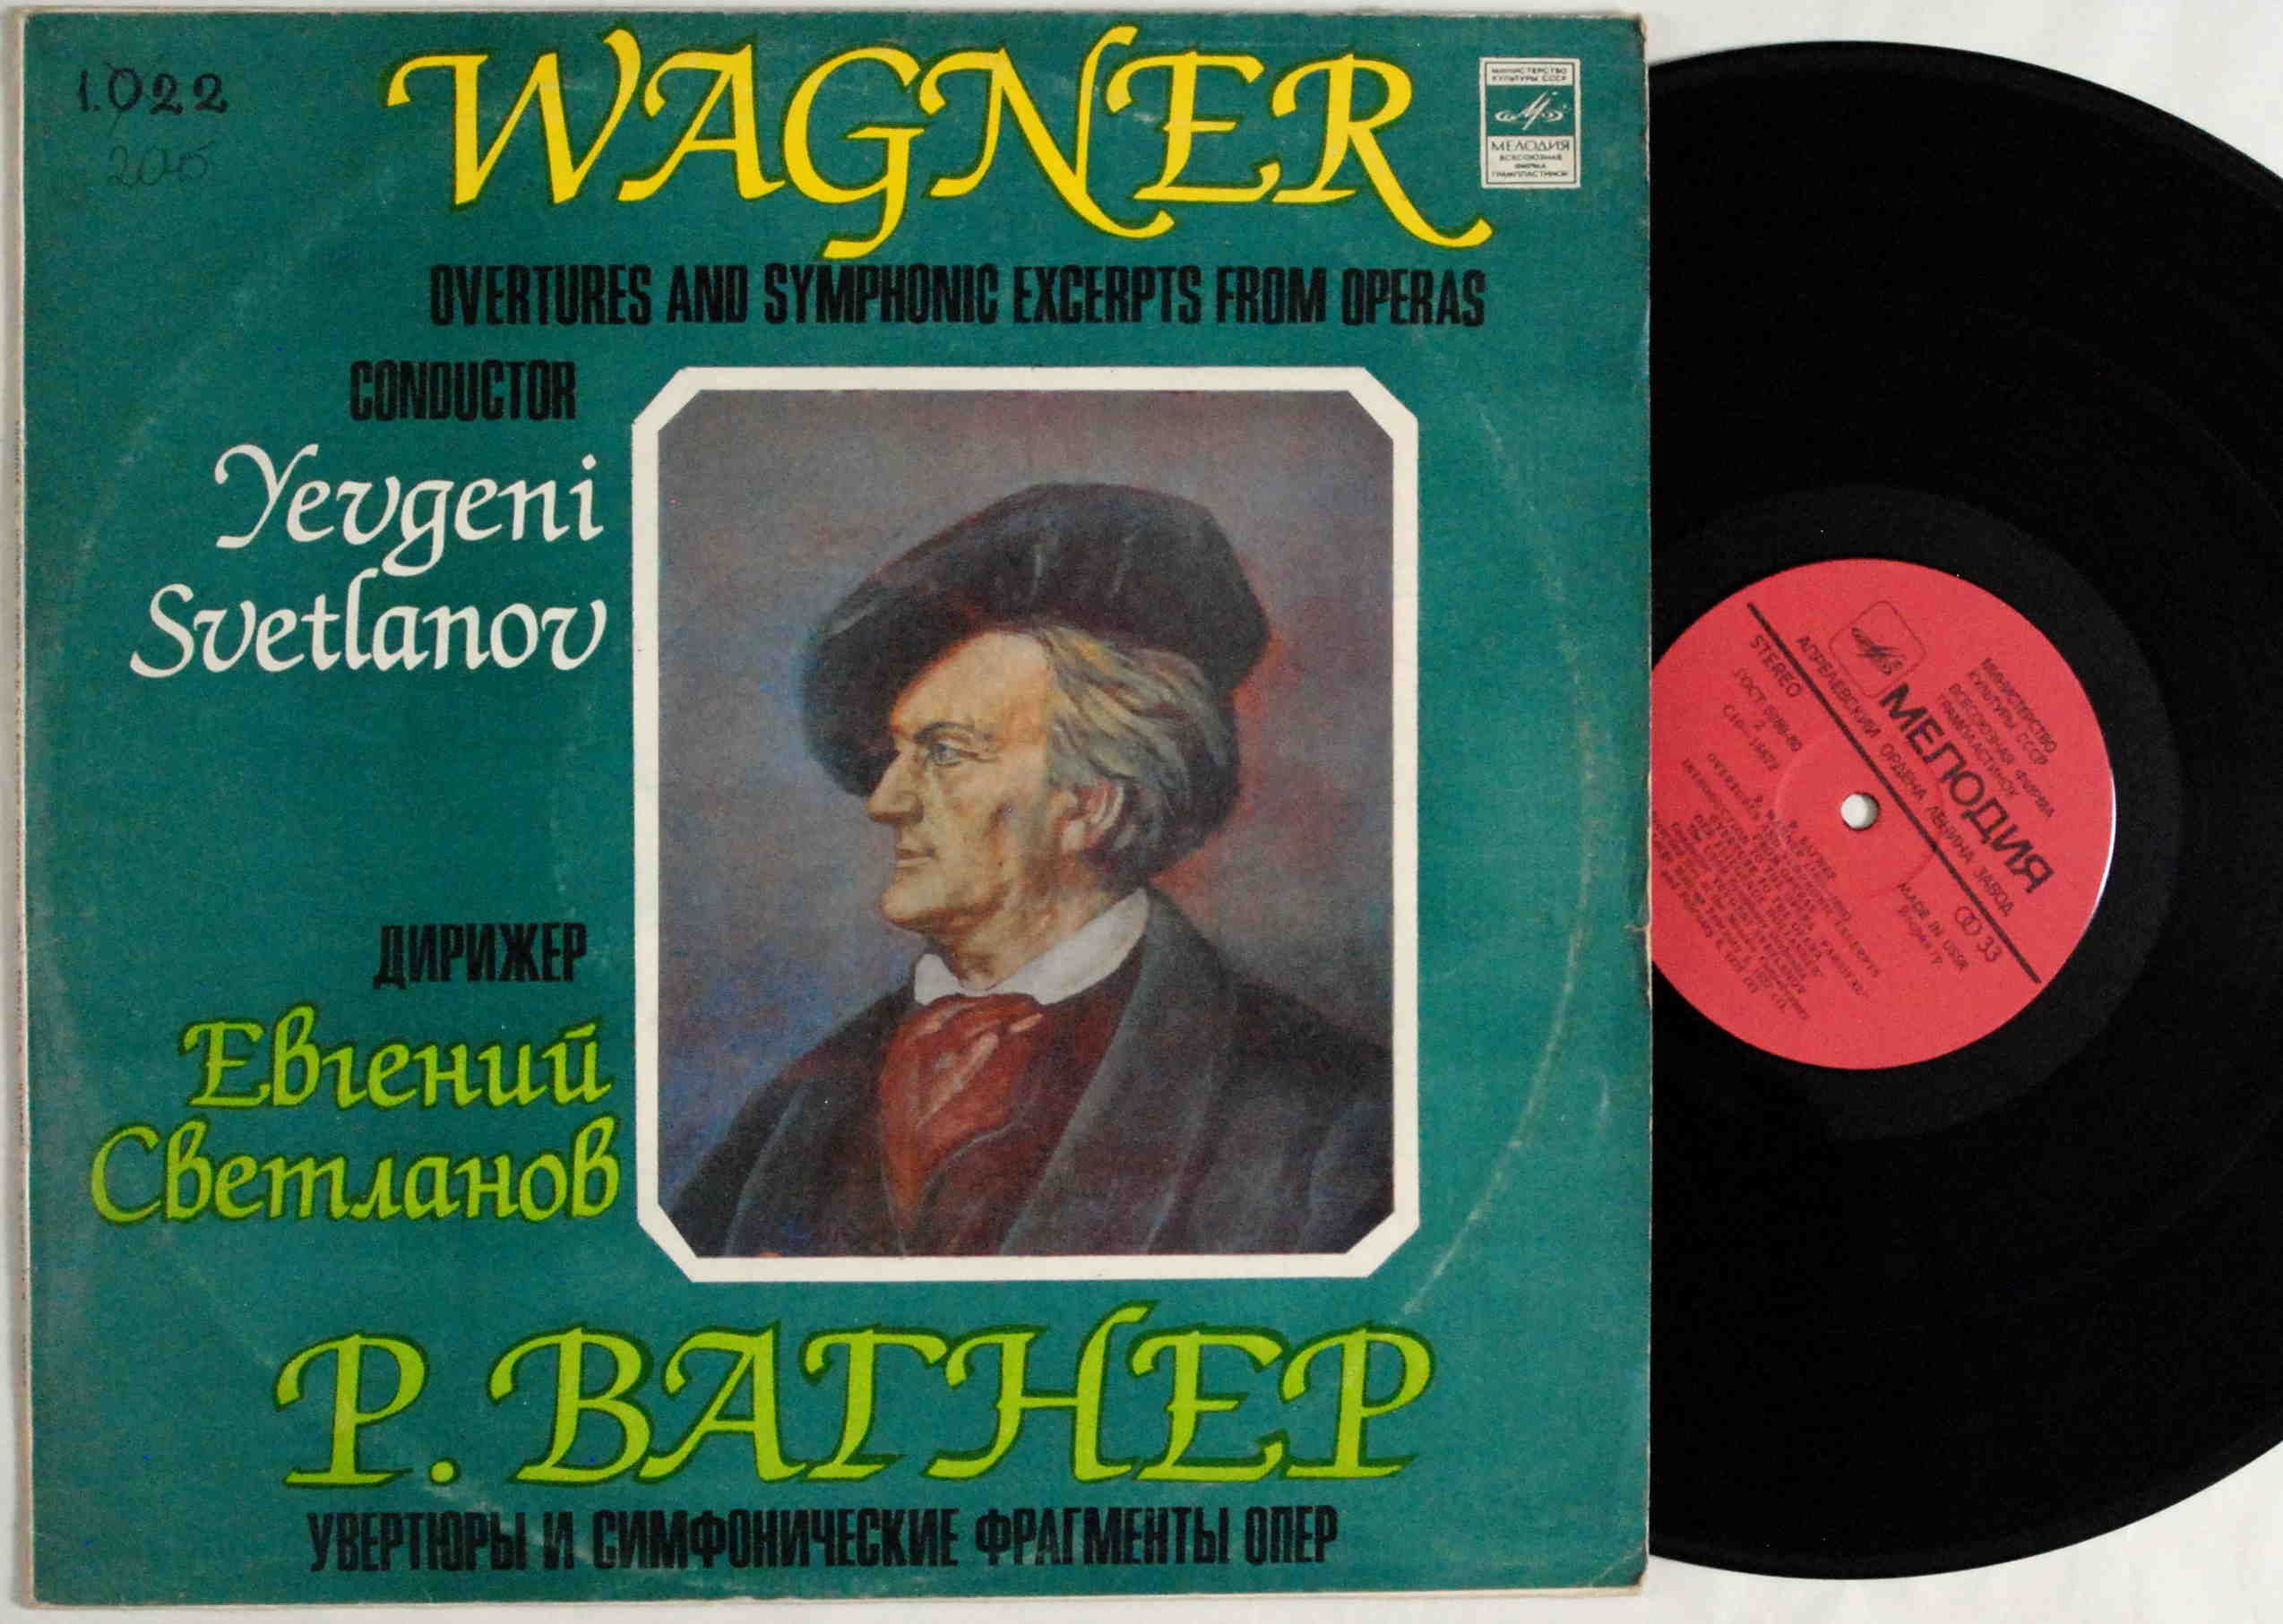 Richard Wagner - Overtures And Symphonic Excerpts From Operas